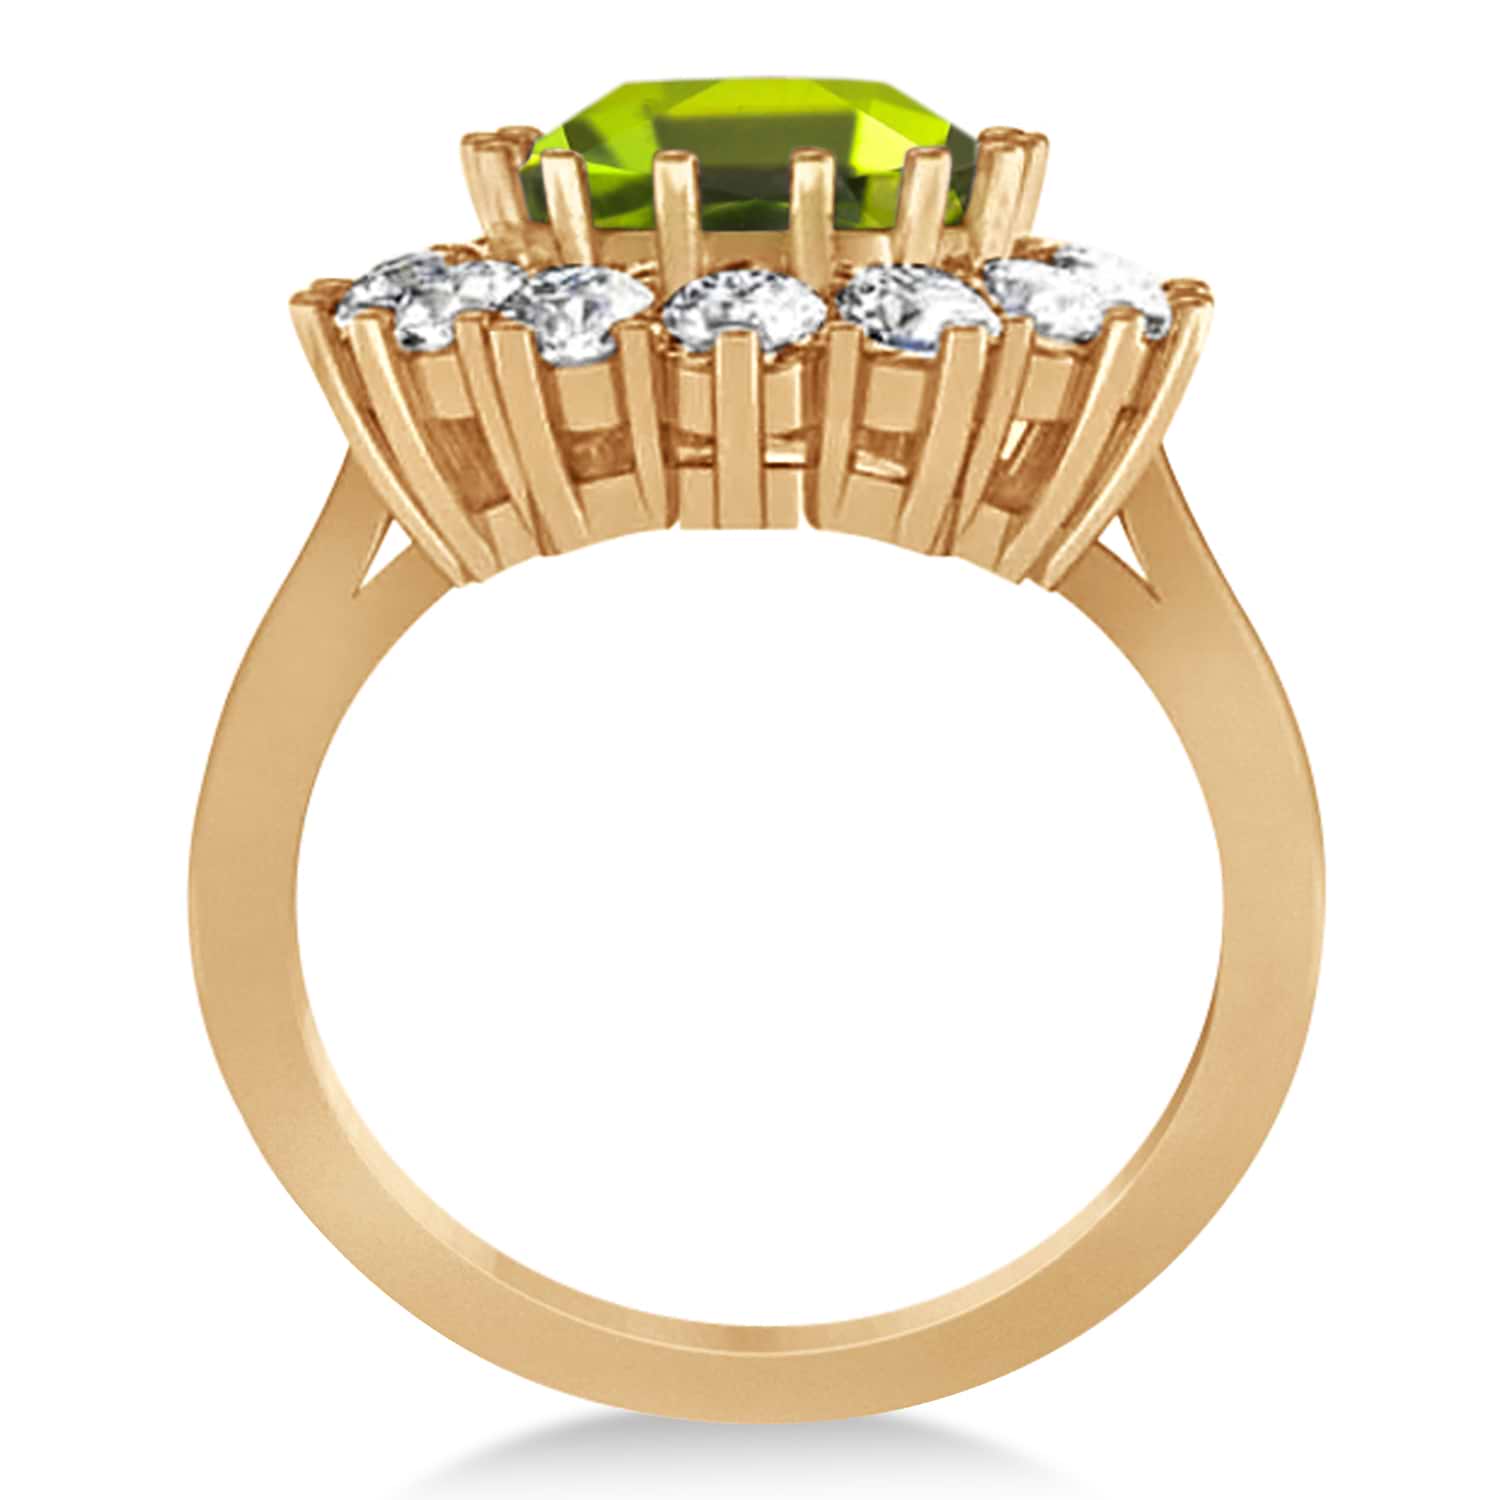 Oval Peridot & Diamond Accented Ring in 14k Rose Gold (5.40ctw)